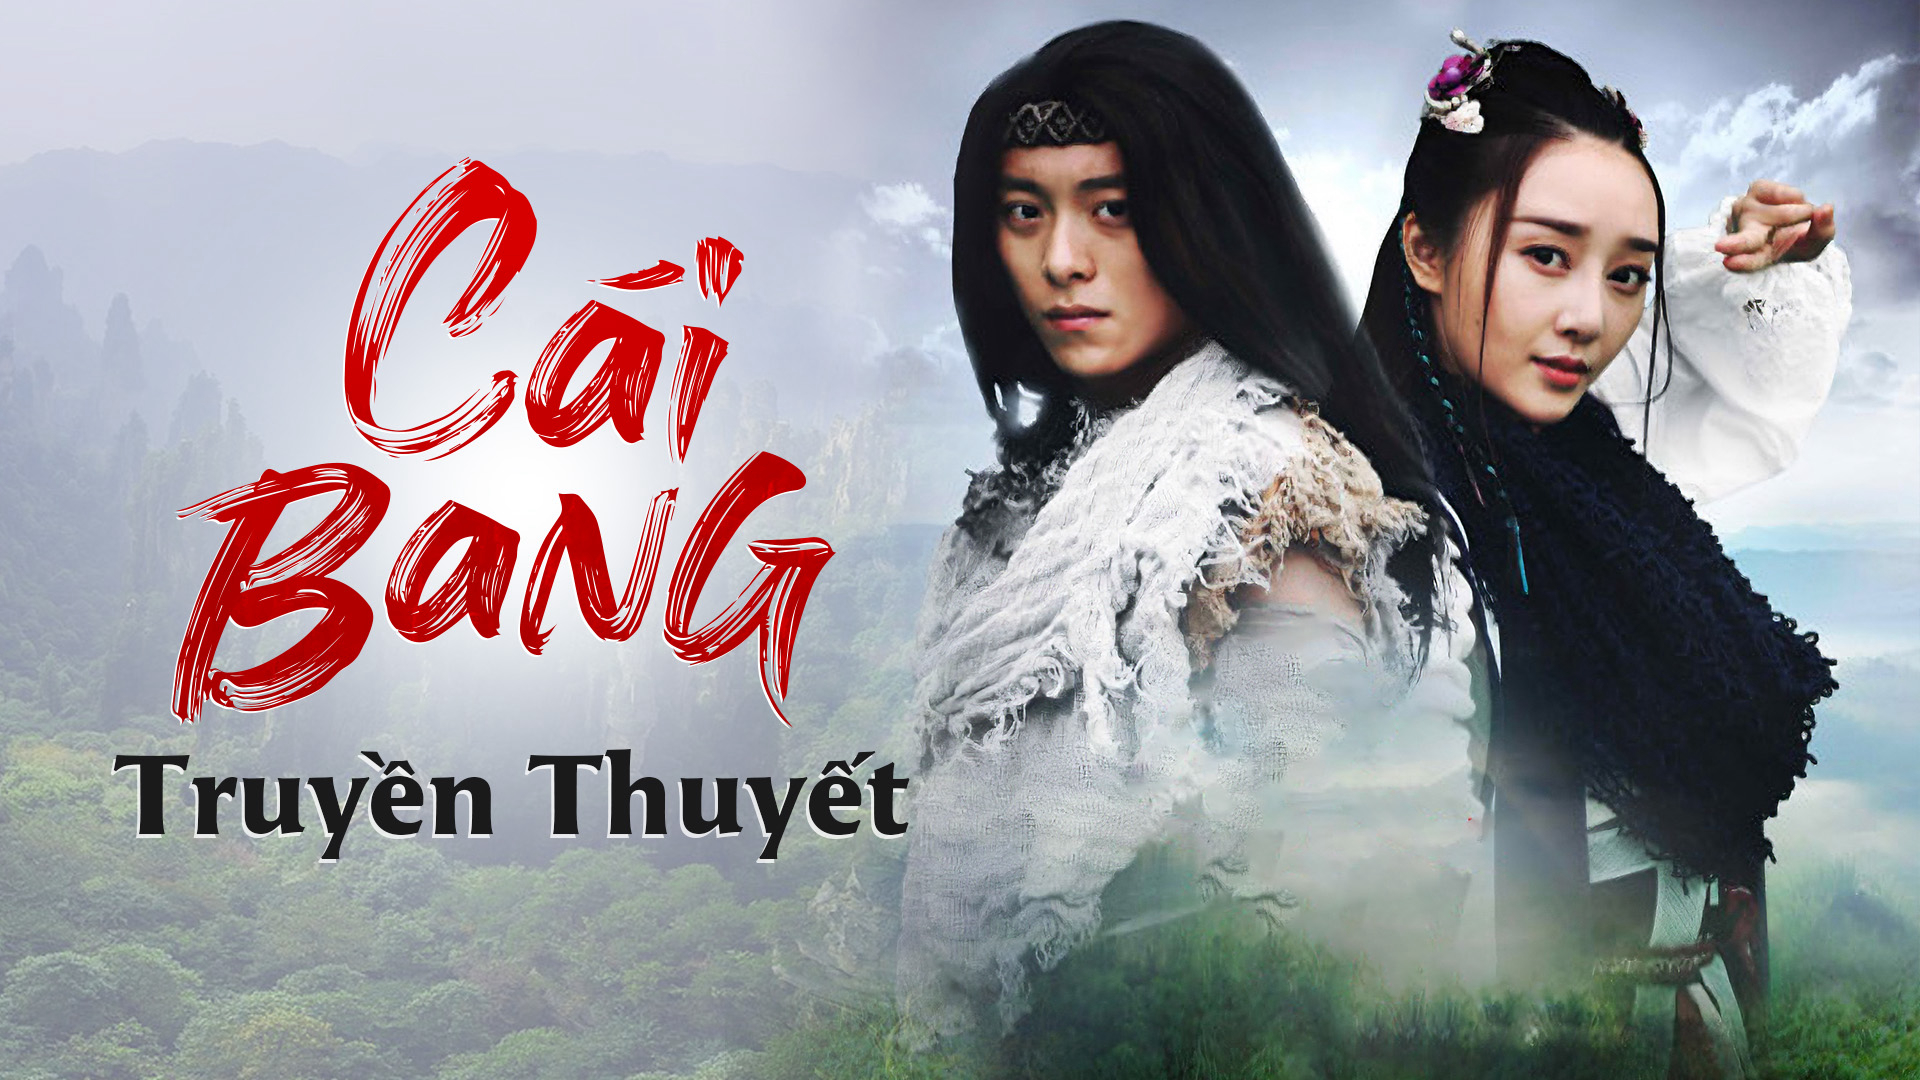 Cái Bang Truyền Thuyết - Other People’s Lives (2021)